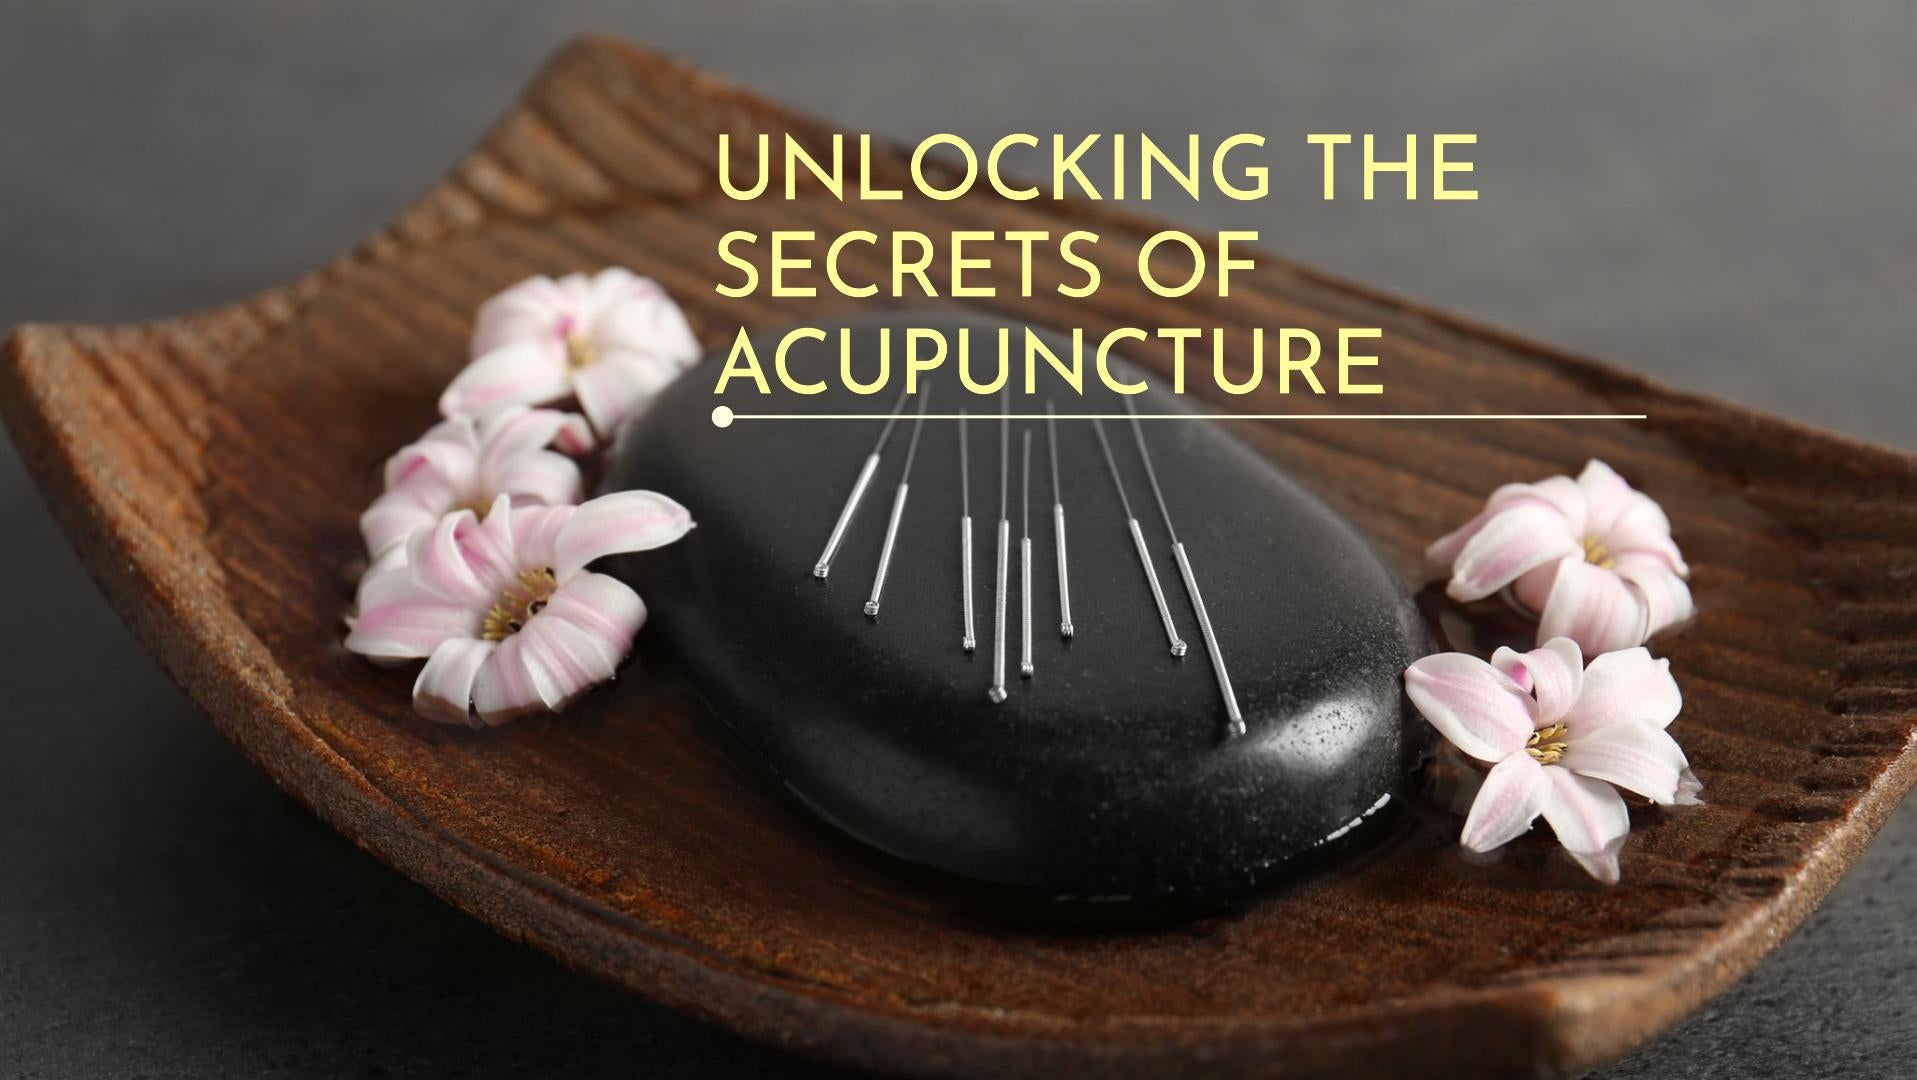 How Does Acupuncture Work and What Is It Used For?